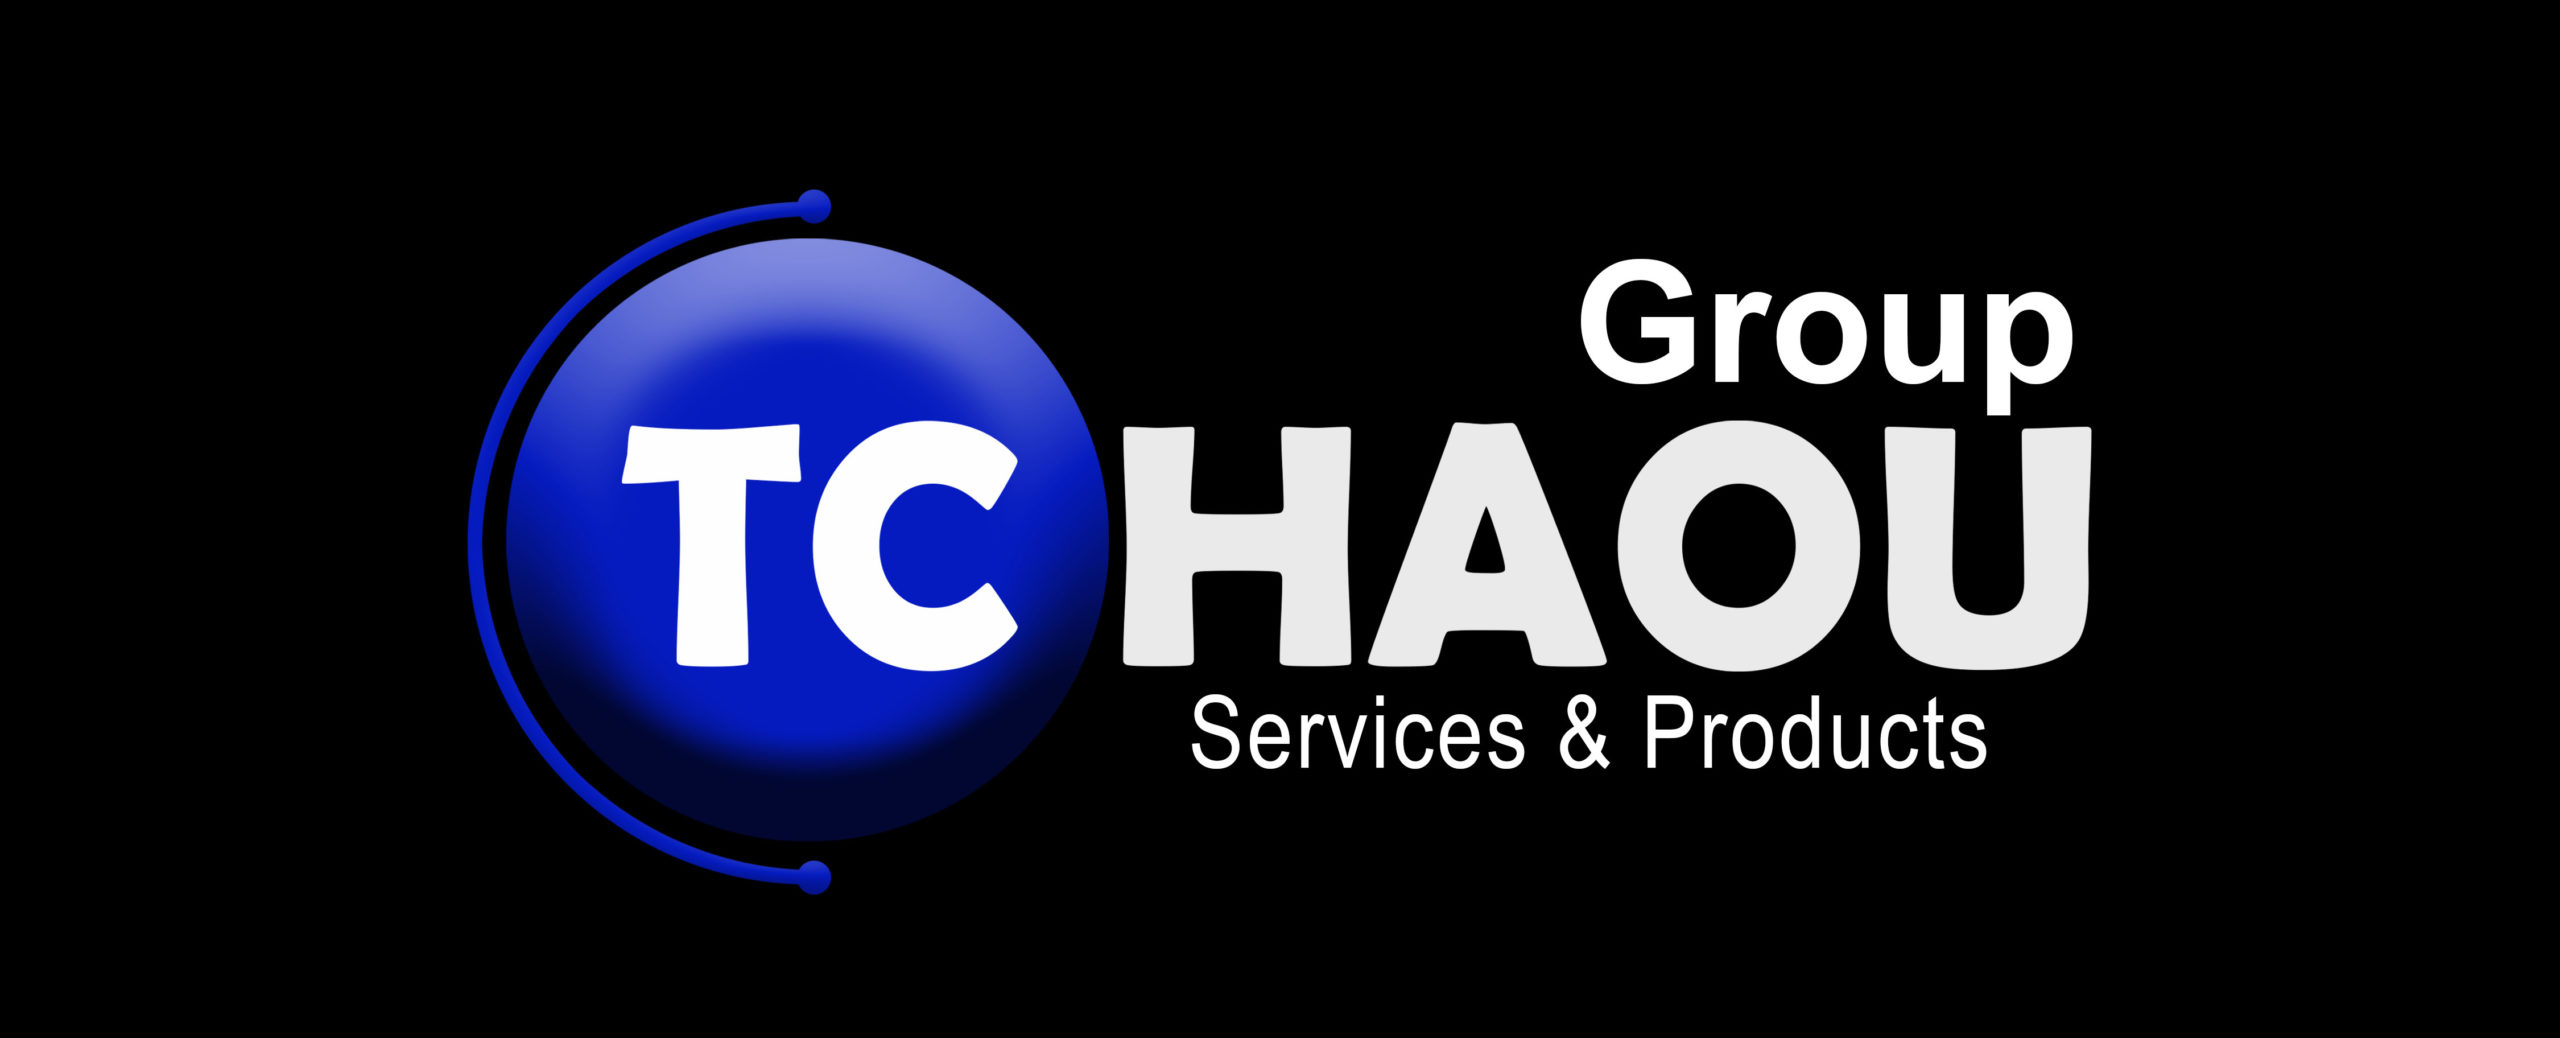 Tchaou Group Services & Products